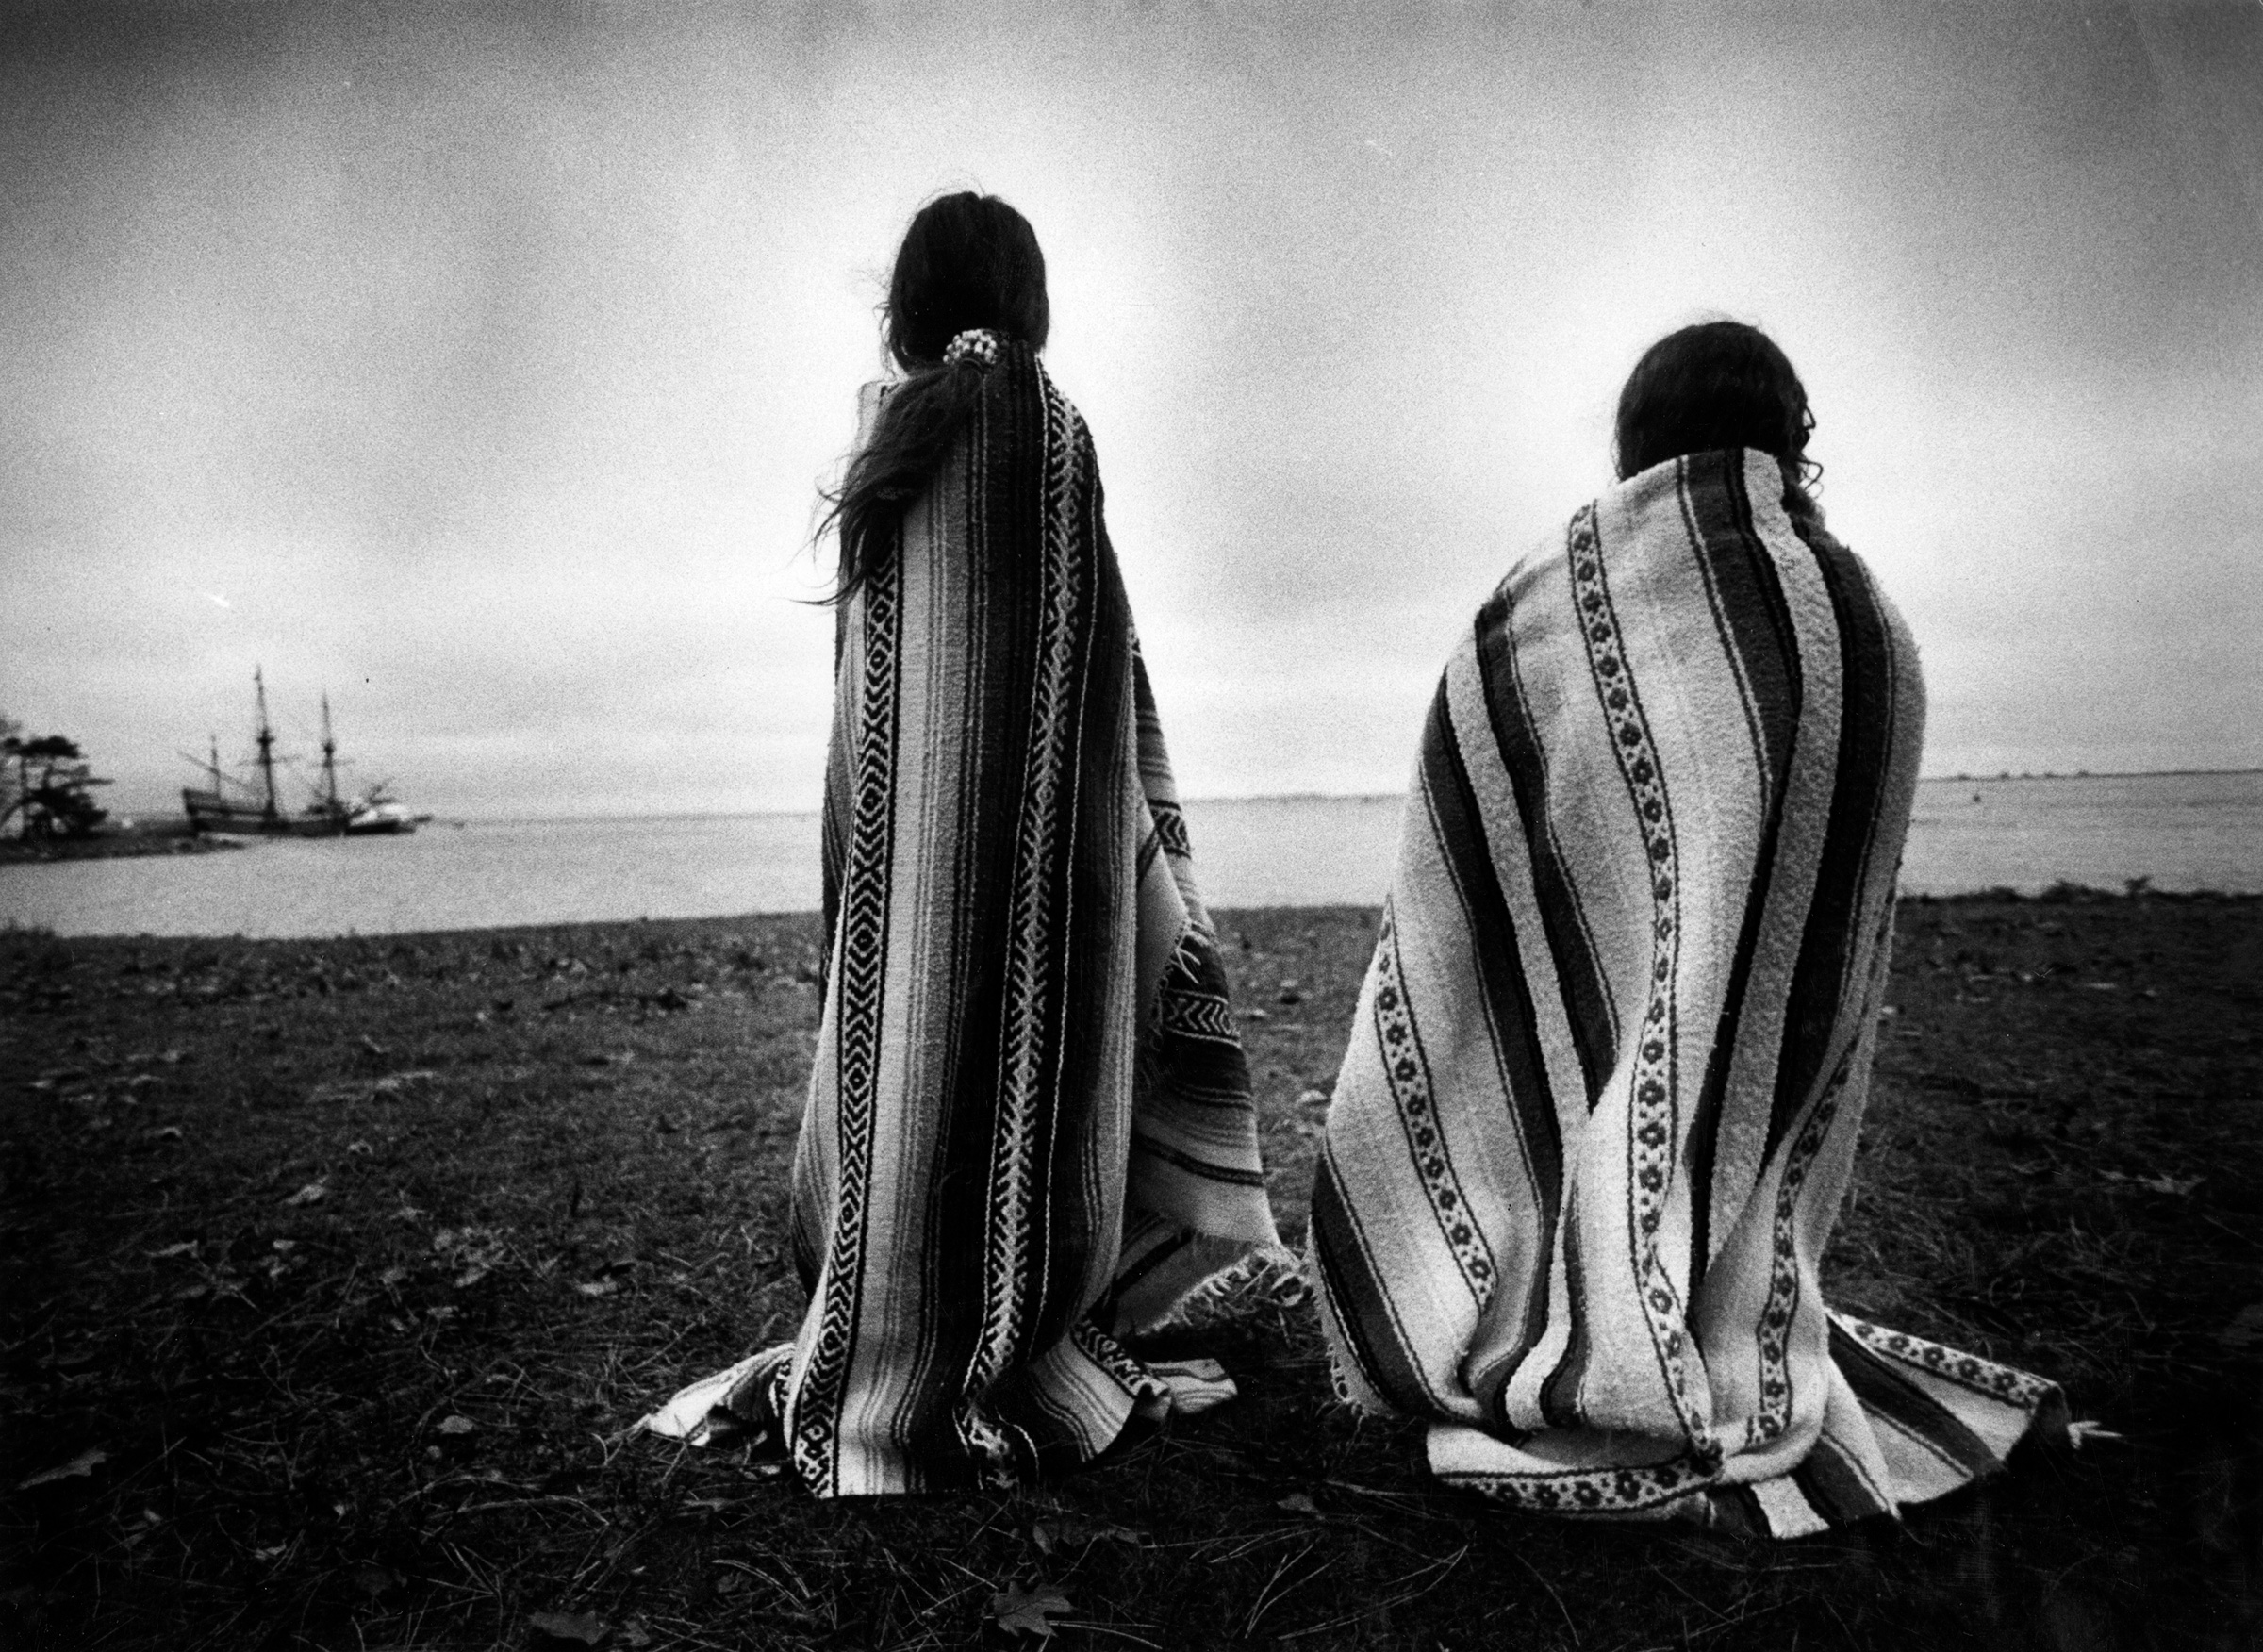 Weetoomoo Carey, 8, left, and Jackolynn Carey, 5, Wampanoag Nipmucs from Mashpee, look across to the Mayflower replica anchored near Plymouth Rock on Nov. 26, 1991. They were with a group of Native Americans gathered for a day of mourning in response to the Pilgrims' Thanksgiving